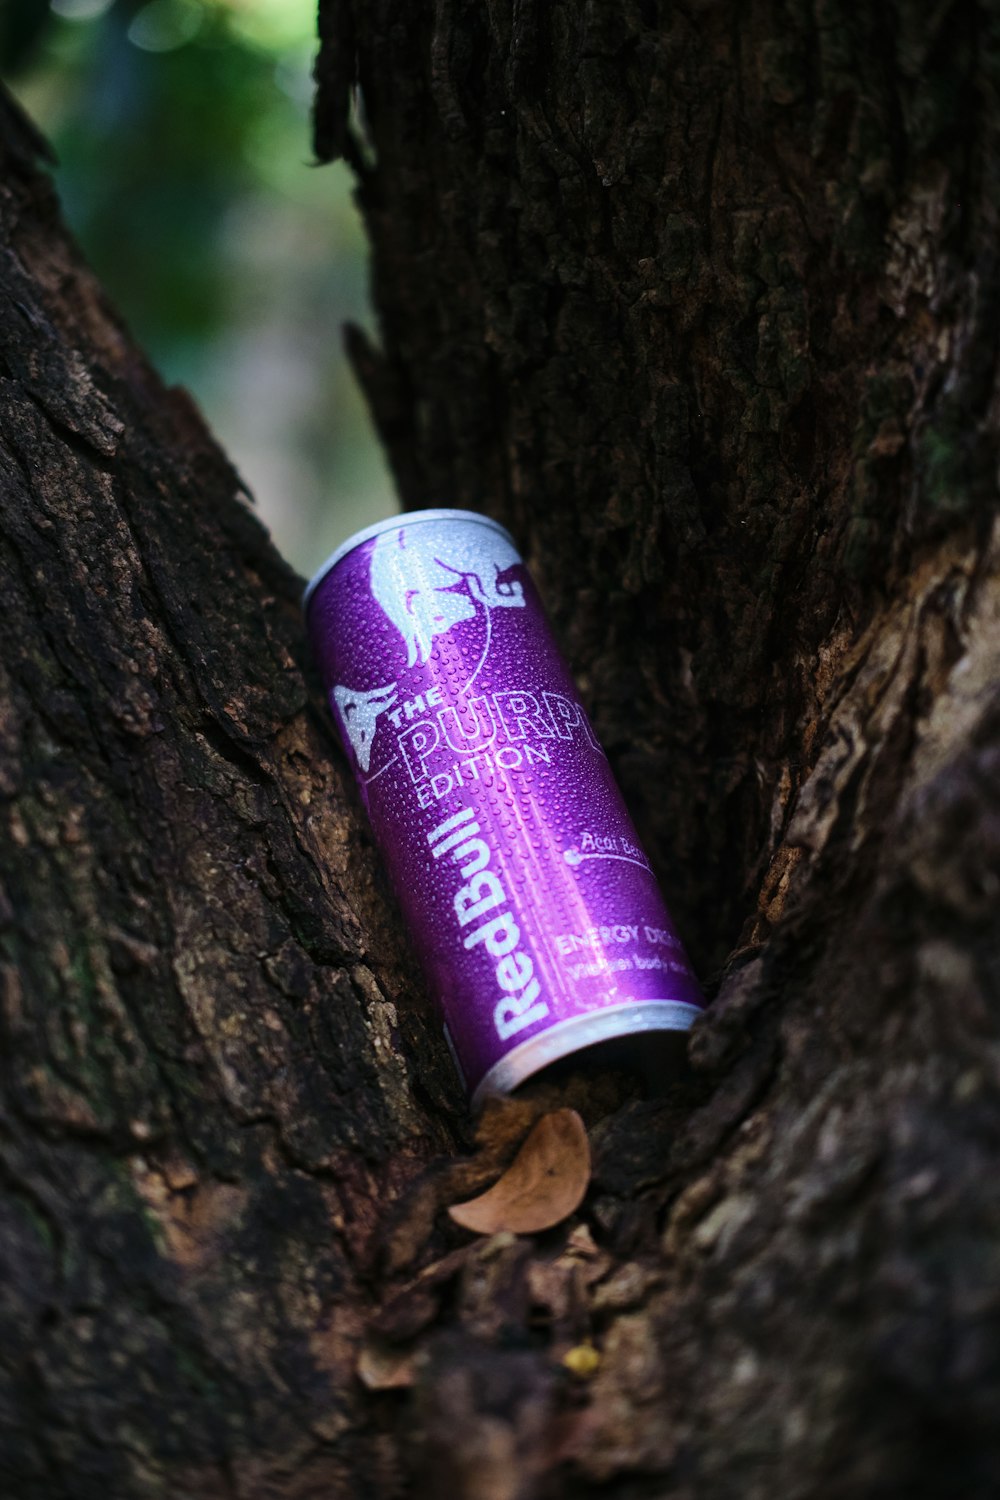 a can of beer sitting in the middle of a tree